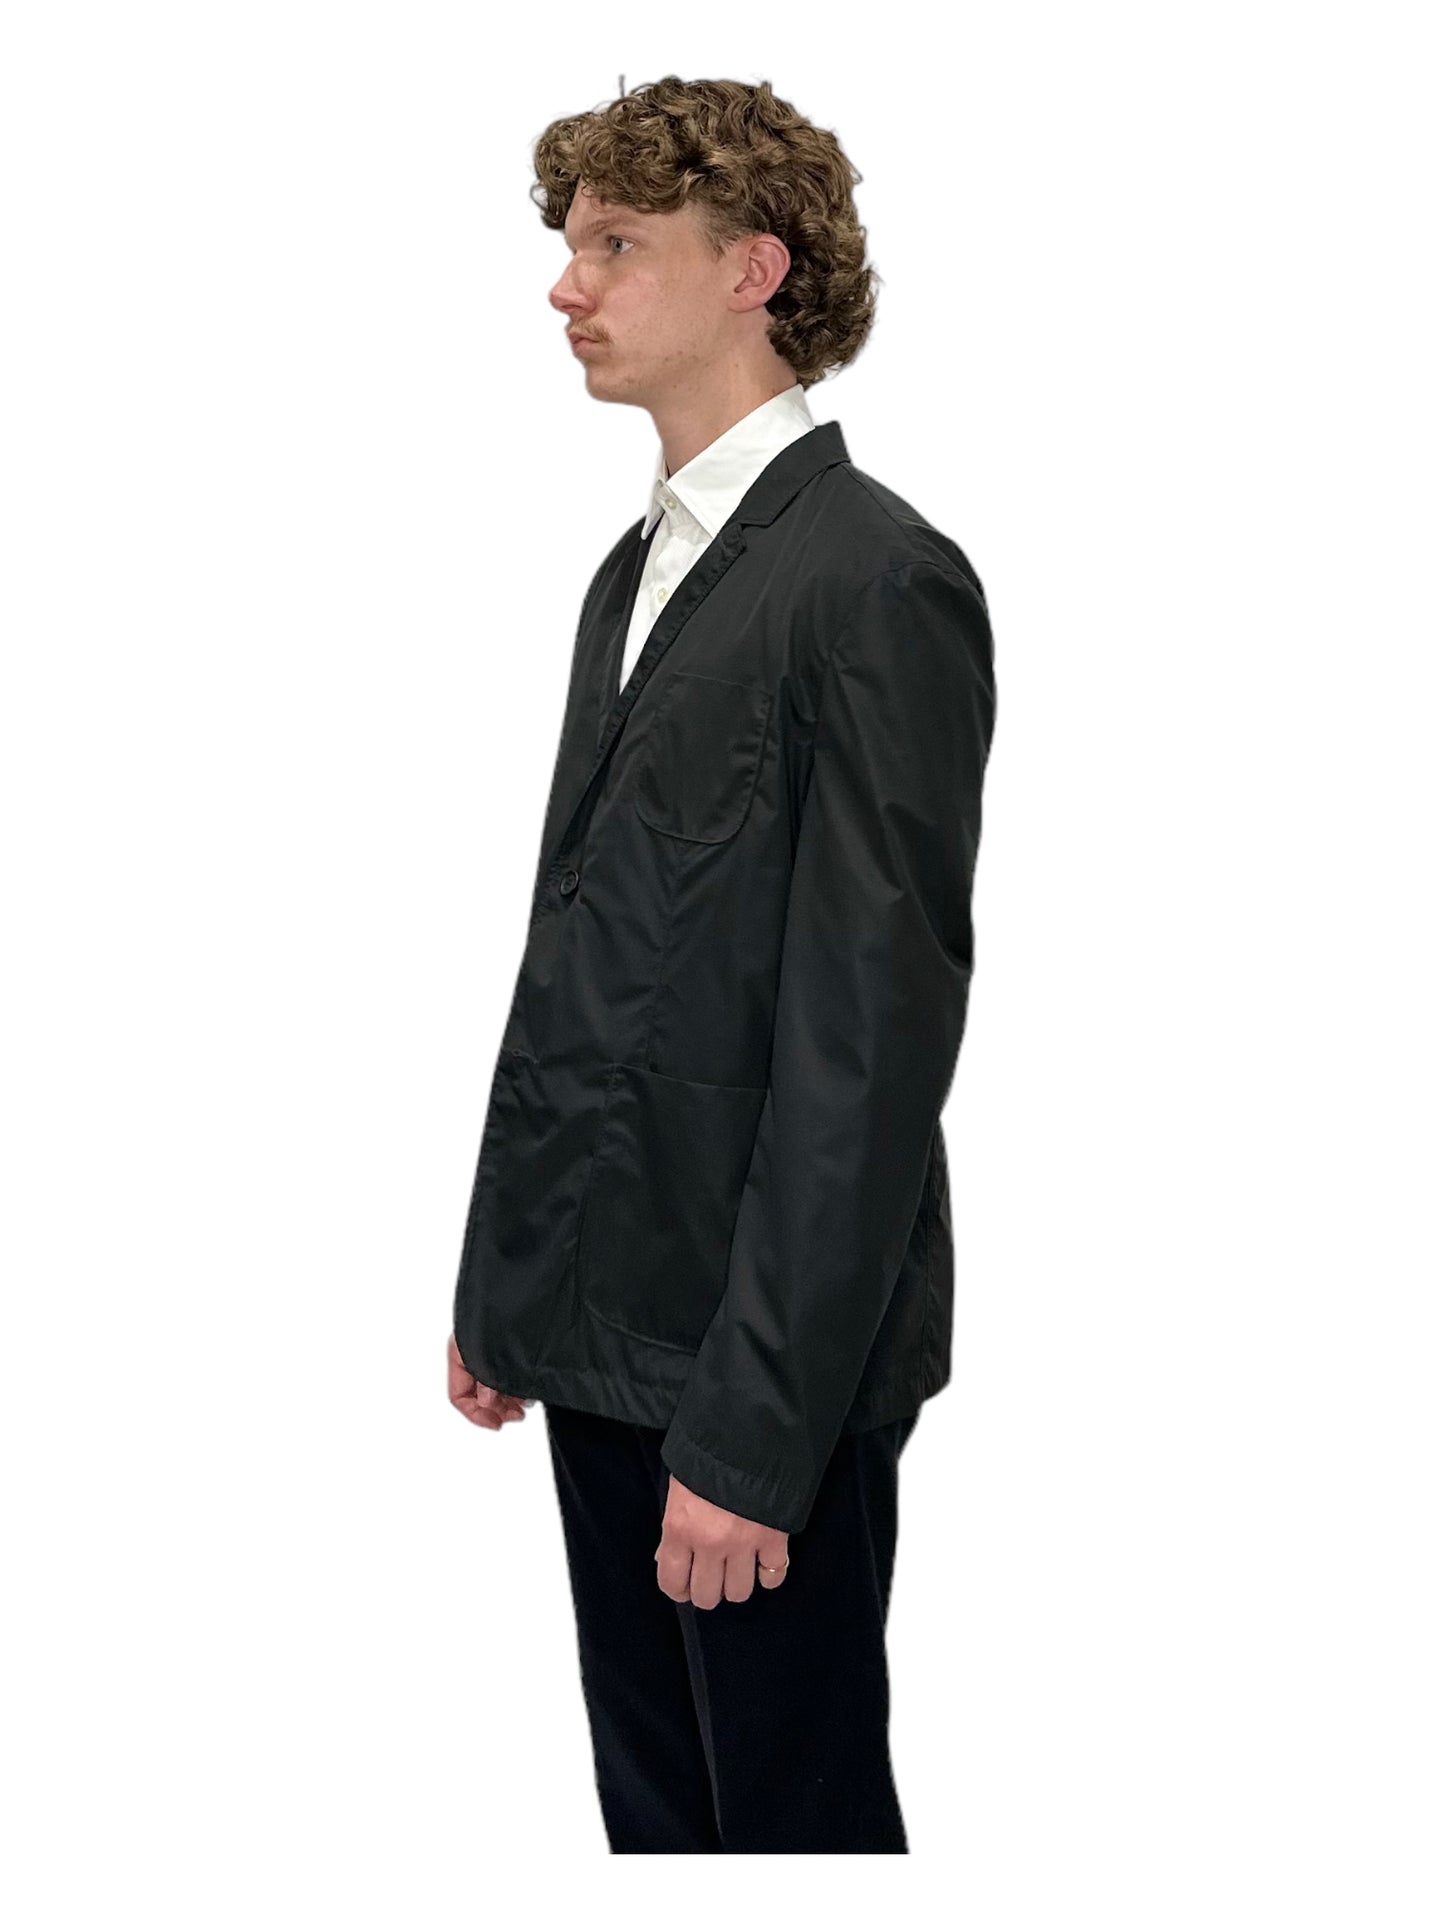 Burberry Black Rain Blazer - Genuine Design Luxury Consignment for Men. New & Pre-Owned Clothing, Shoes, & Accessories. Calgary, Canada